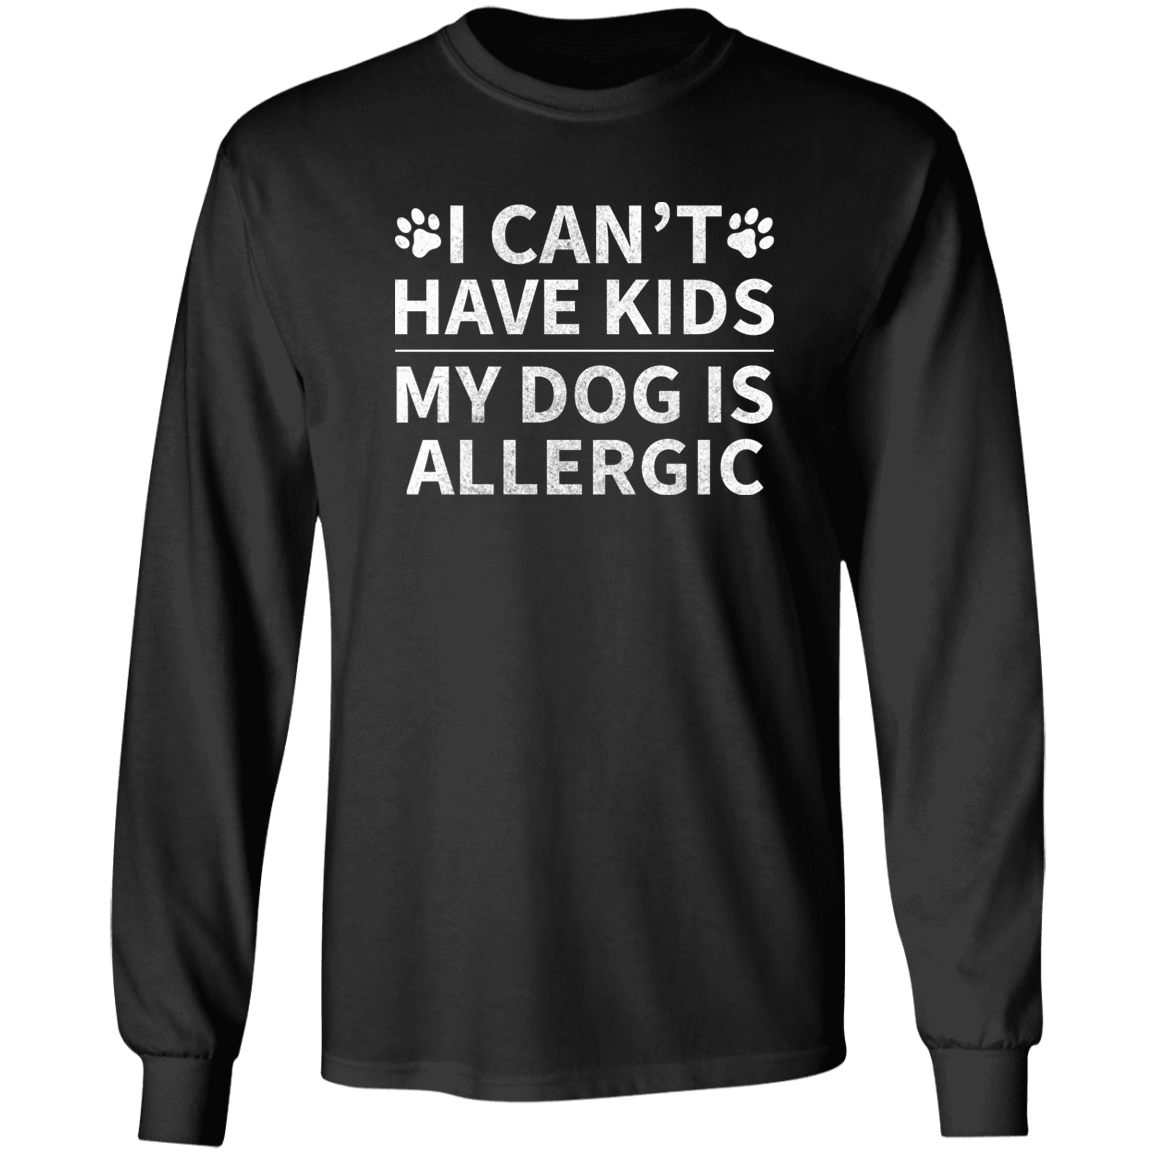 My Dog Is Allergic - Long Sleeve T Shirt.